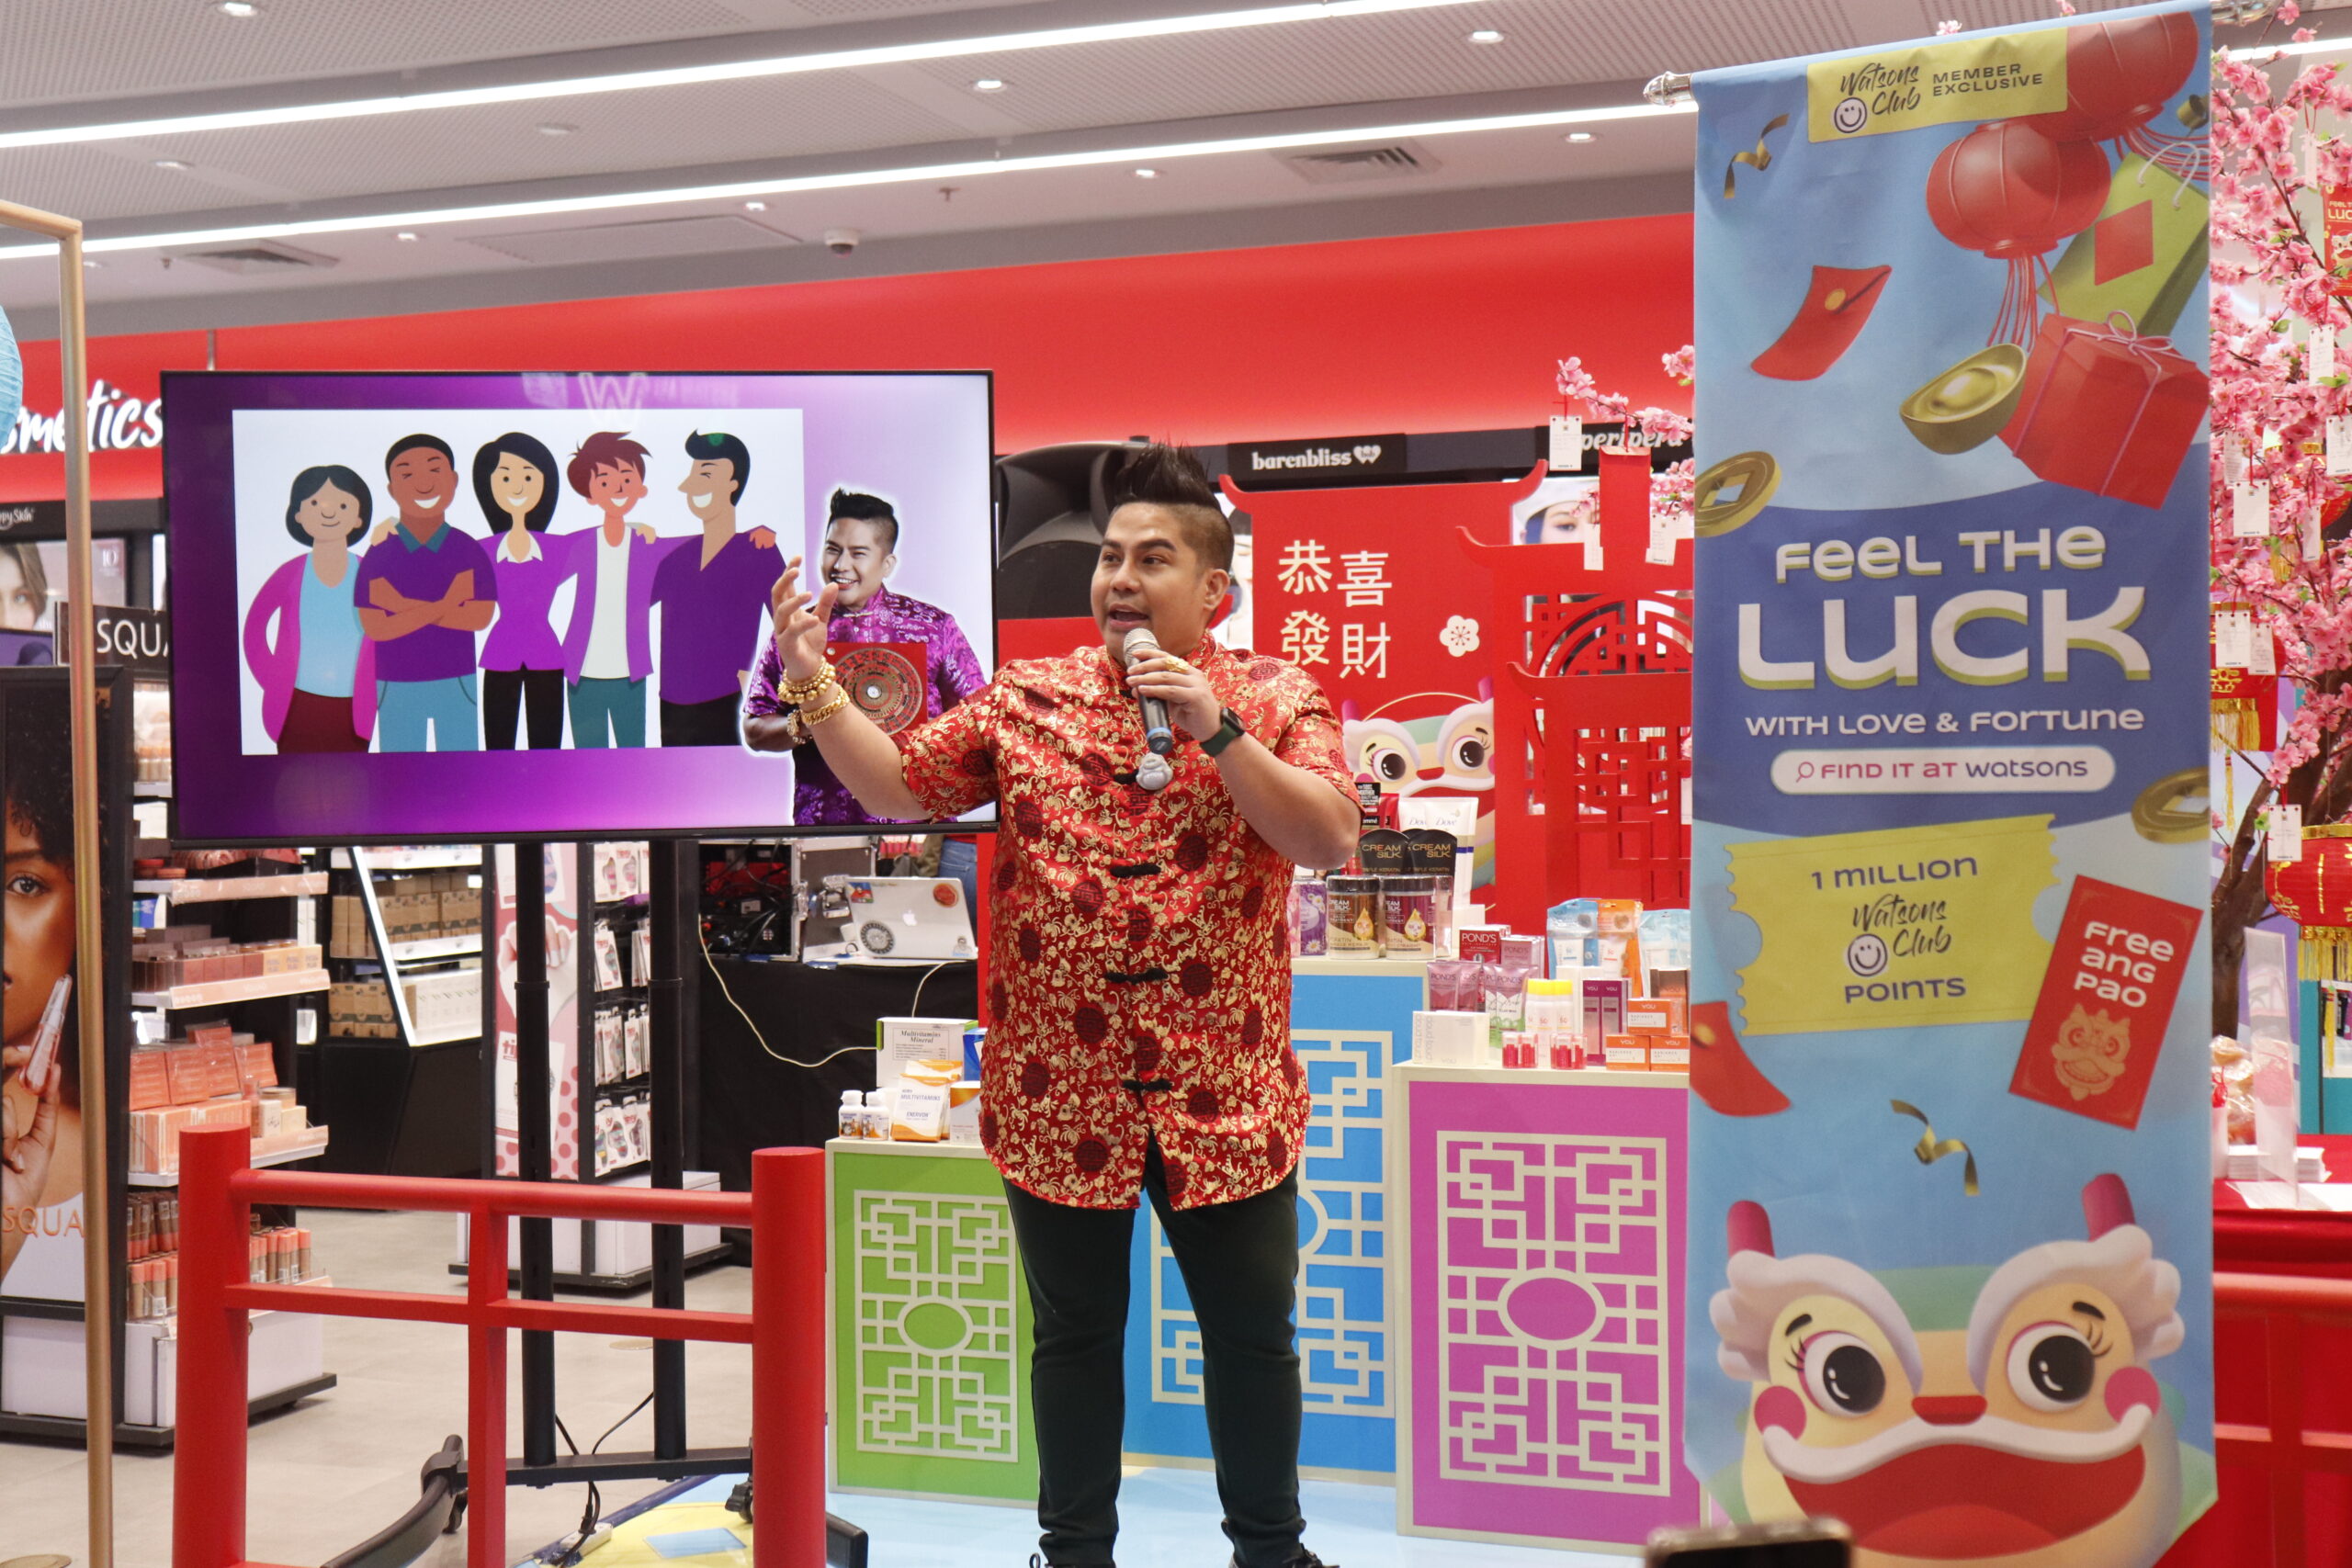 Watsons Finally Welcomes the Wood Year of the Dragon with Exciting Treats for Everyone